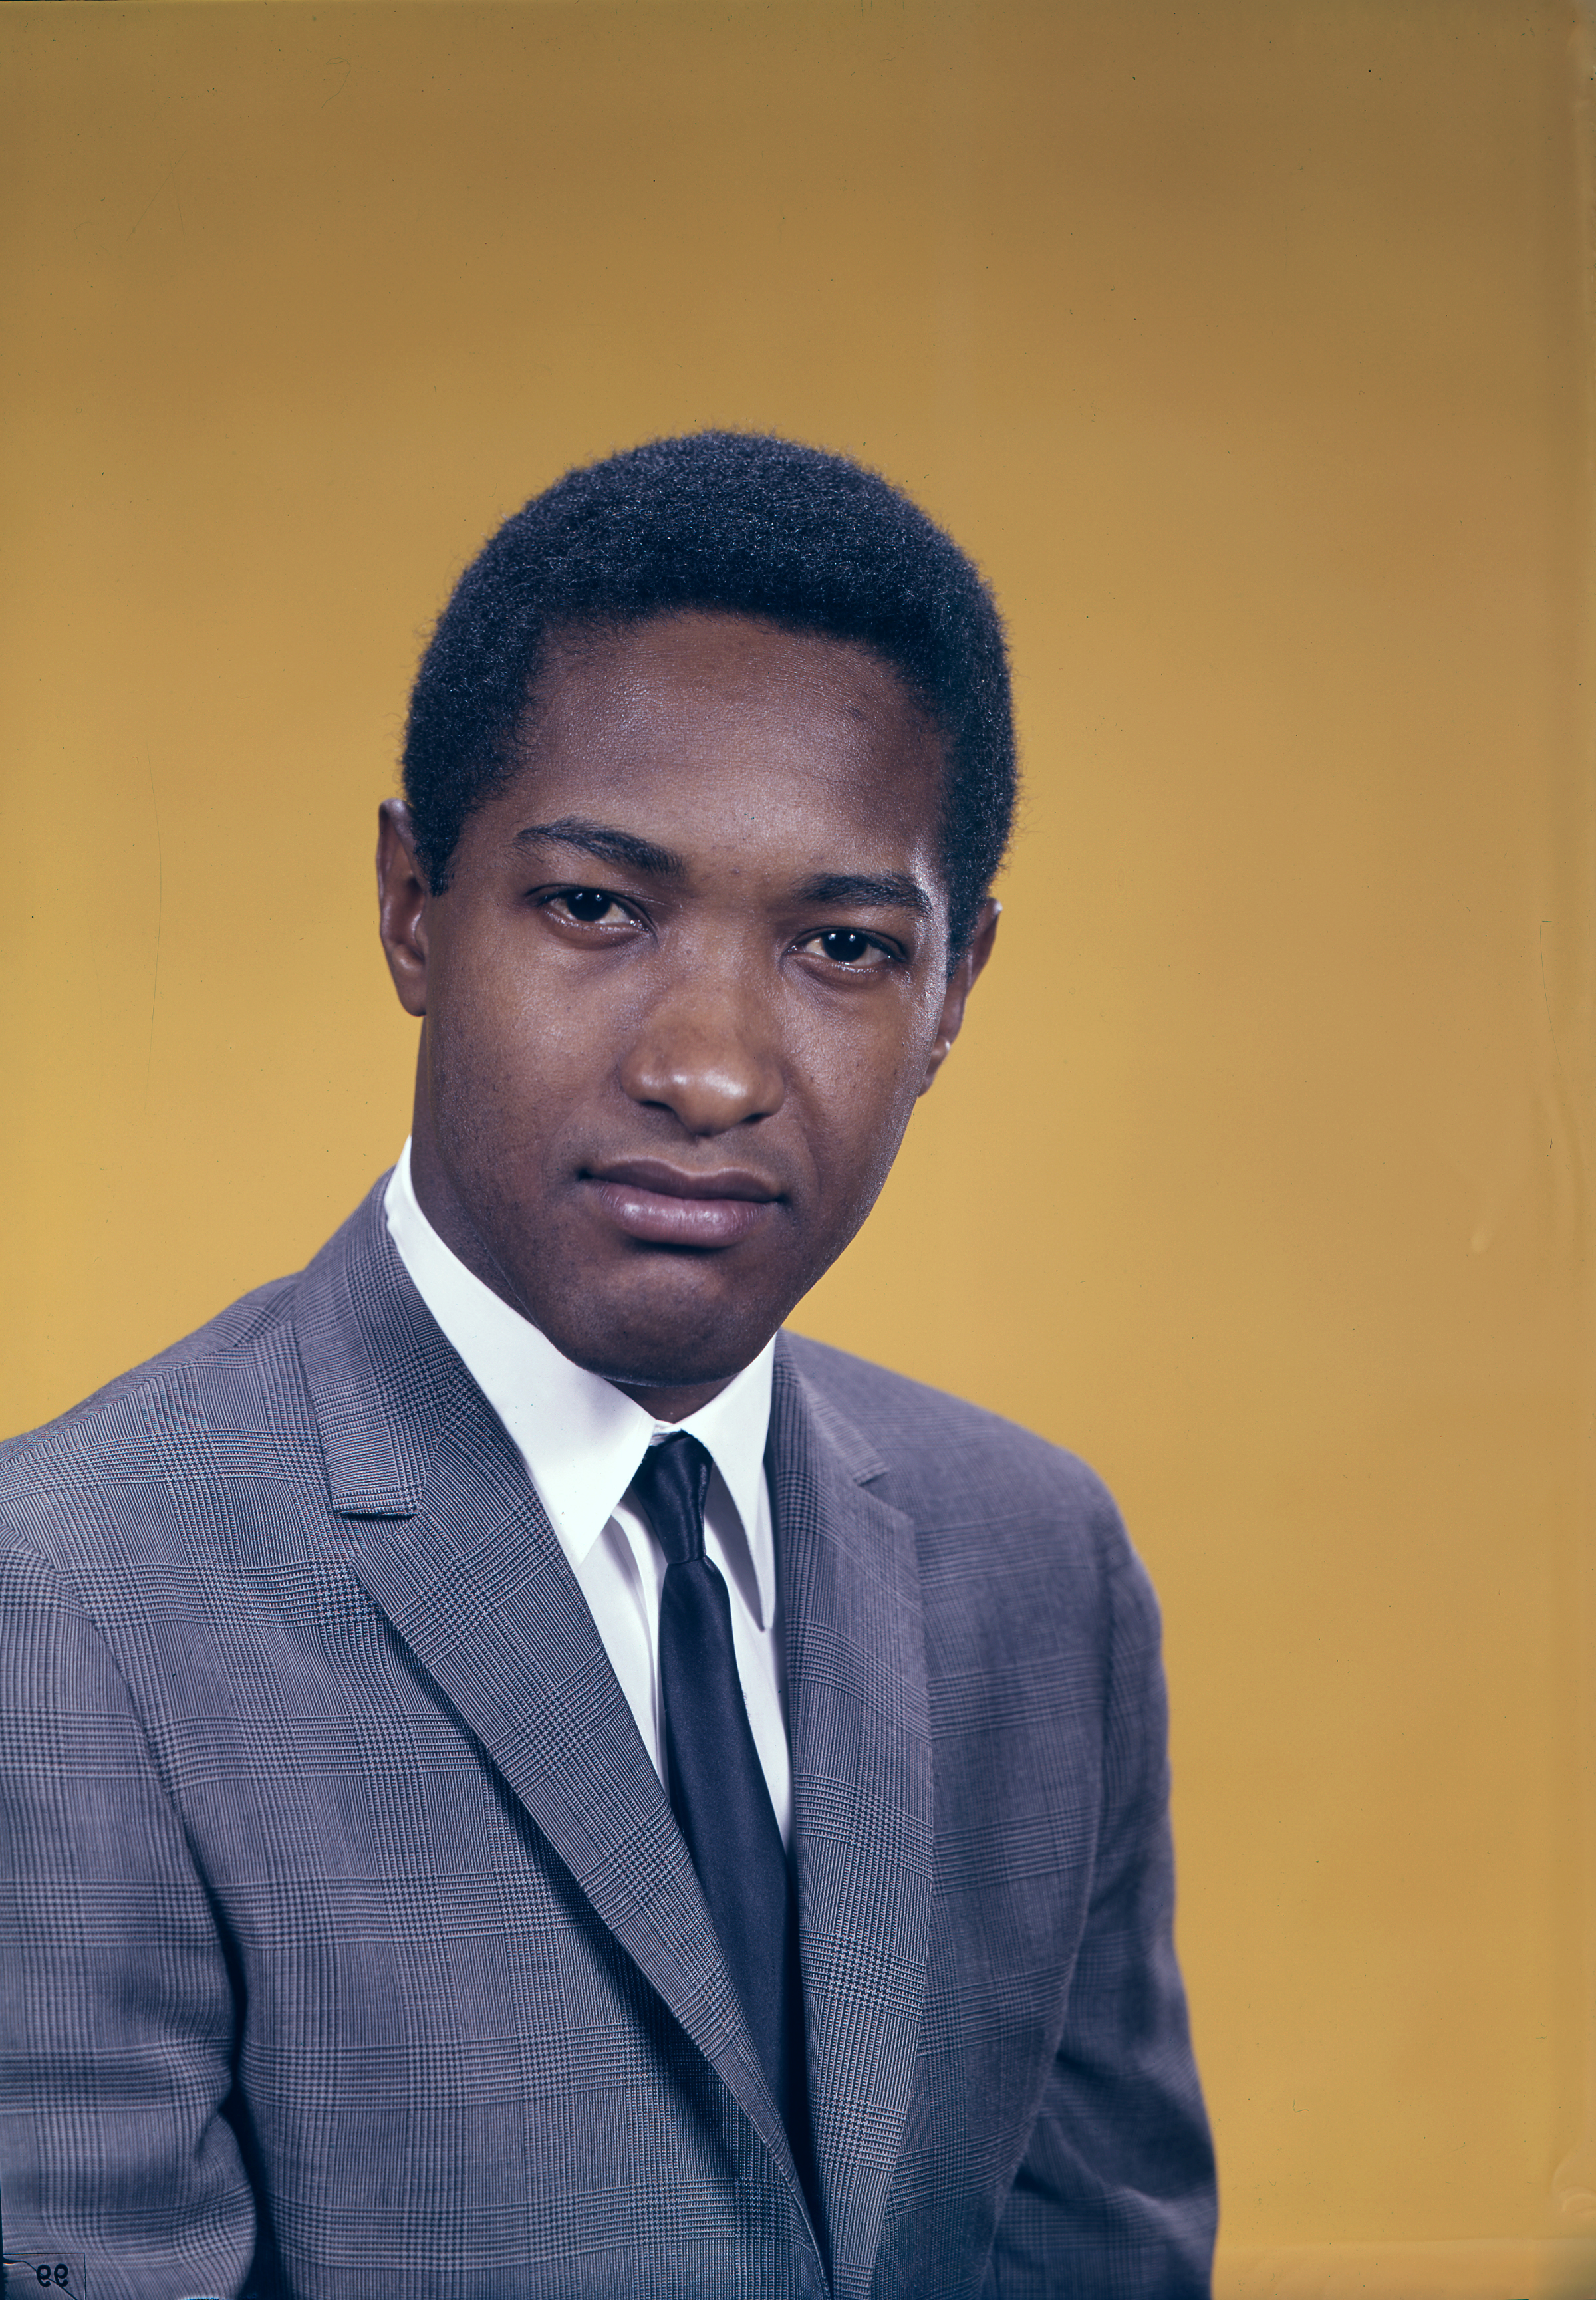 A portrait of Sam Cooke, circa 1960 | Source: Getty Images